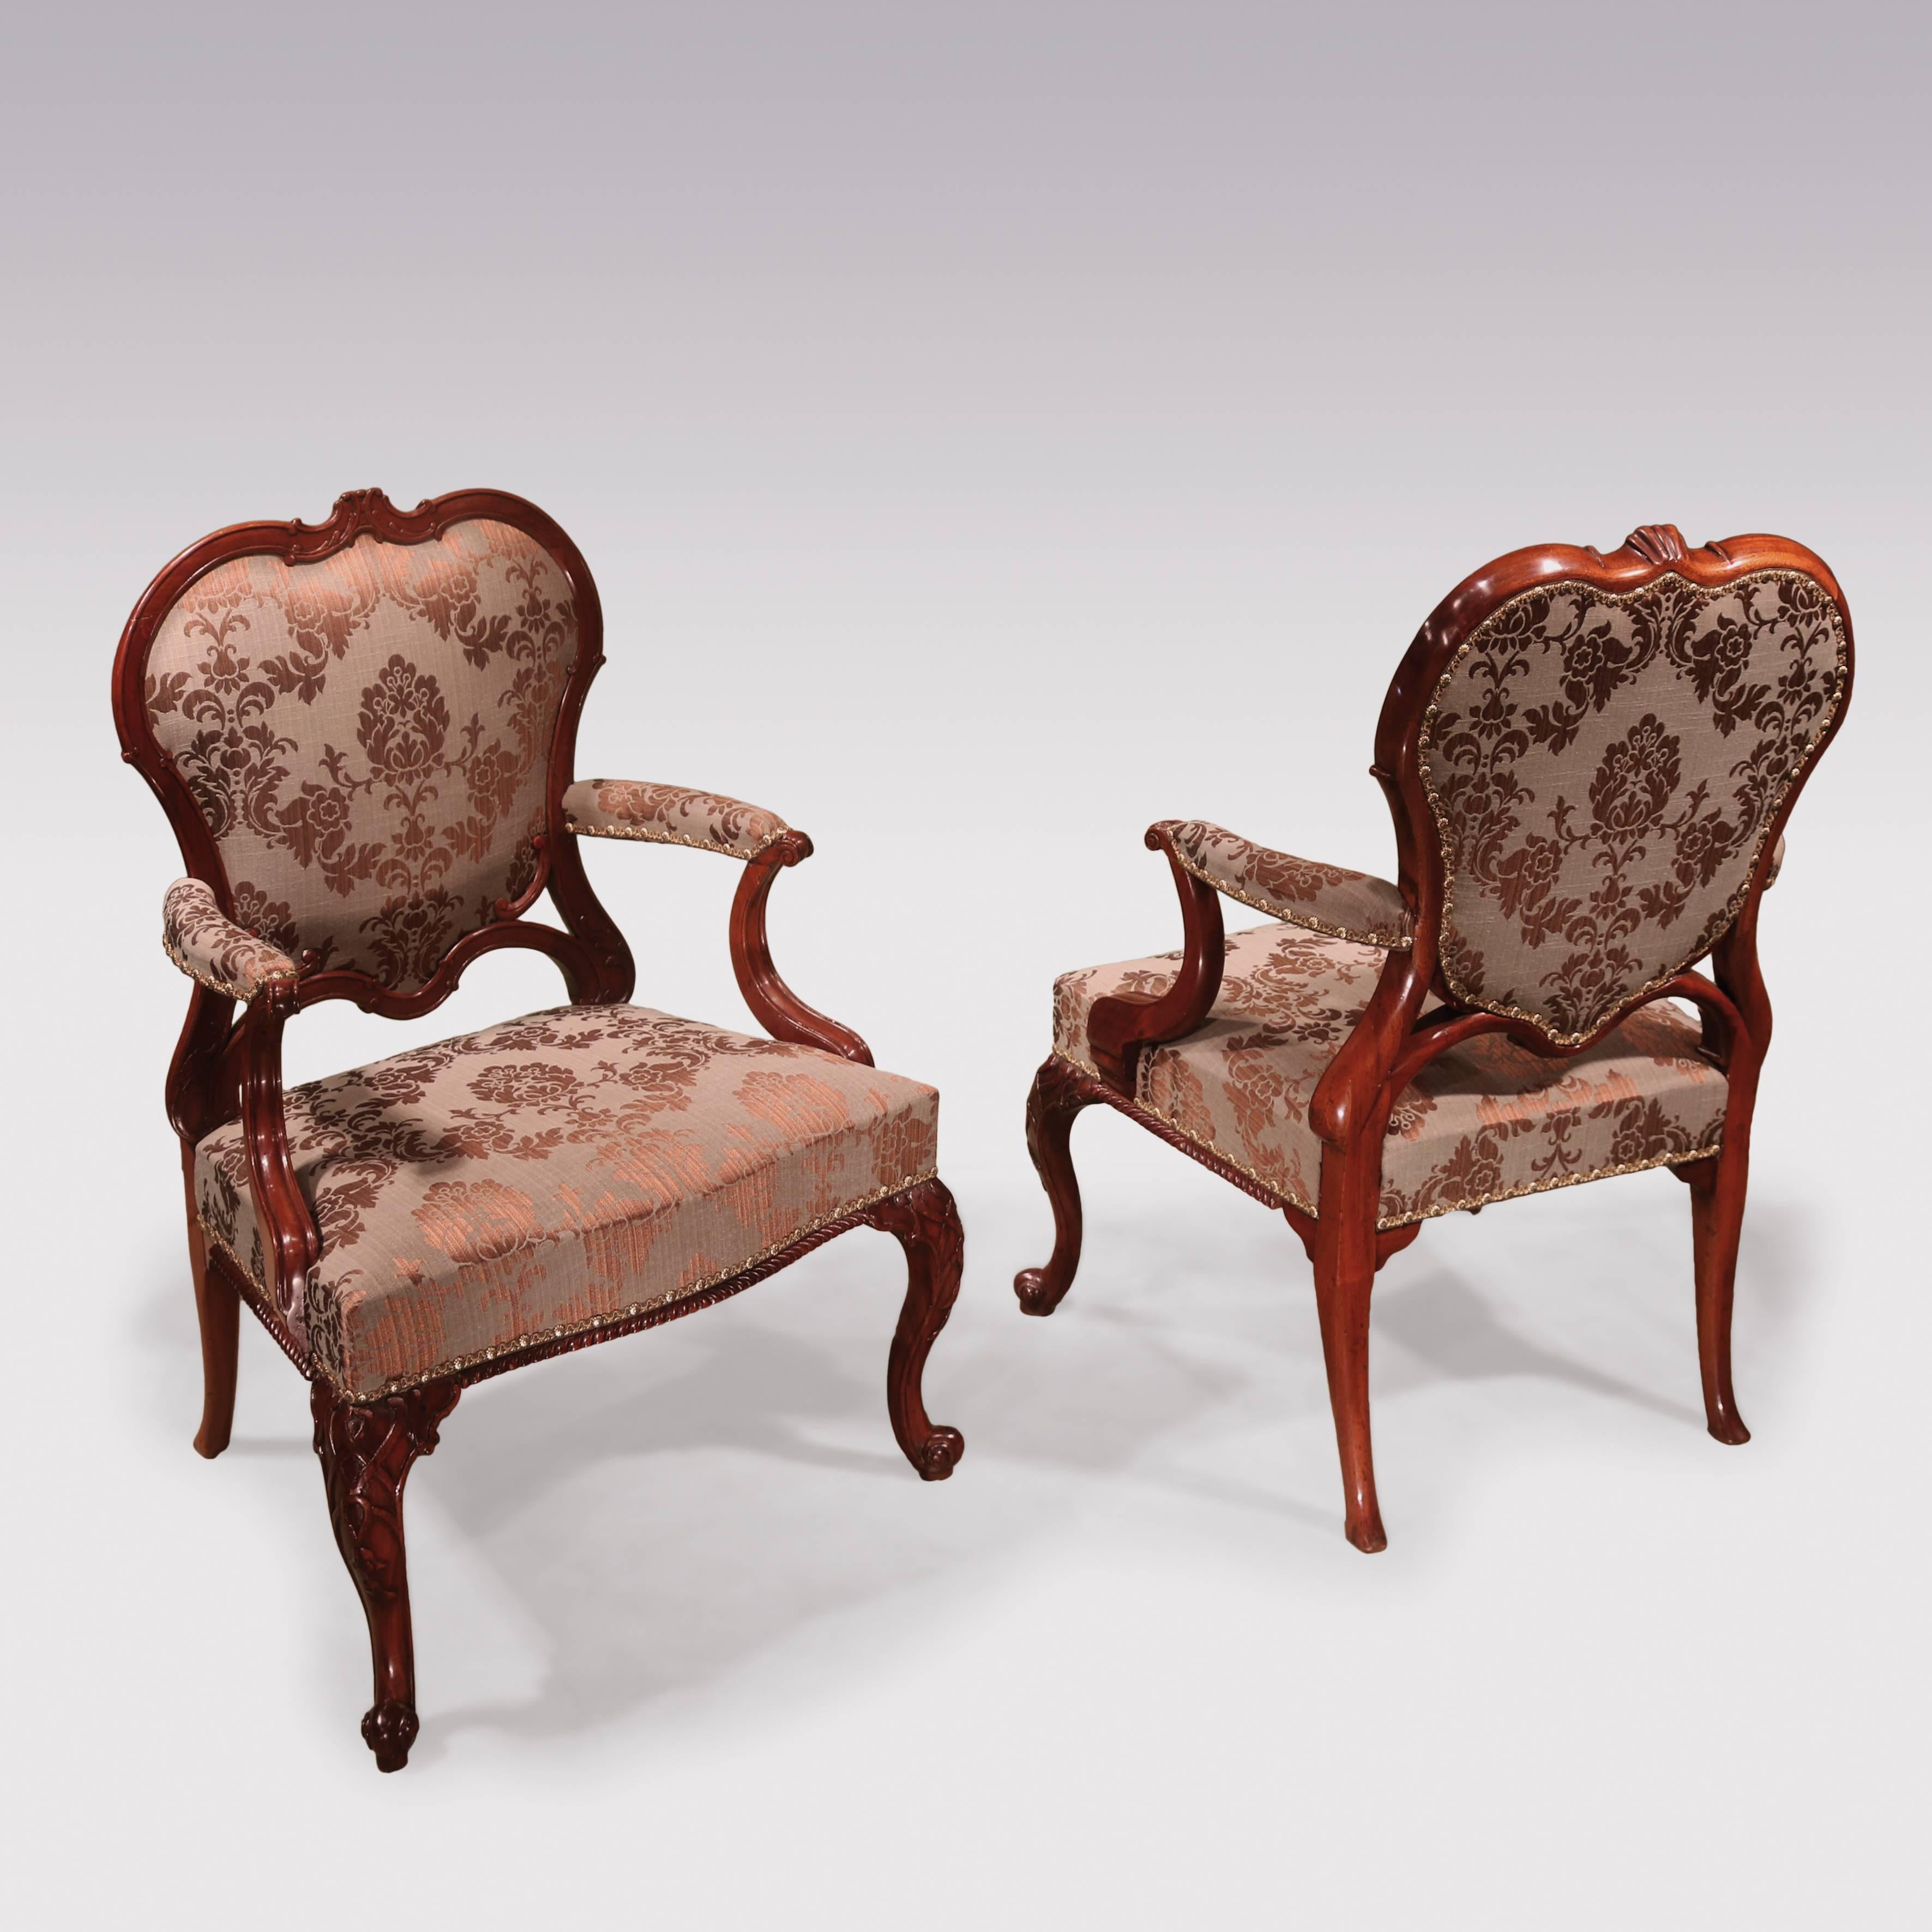 An important pair of mid-18th century Chippendale period mahogany Library Armchairs, having unusual carved and scrolled cartouche-shaped backs, with scroll moulded set-back arms. The Chairs having stuffover seats with gadrooned borders, supported on